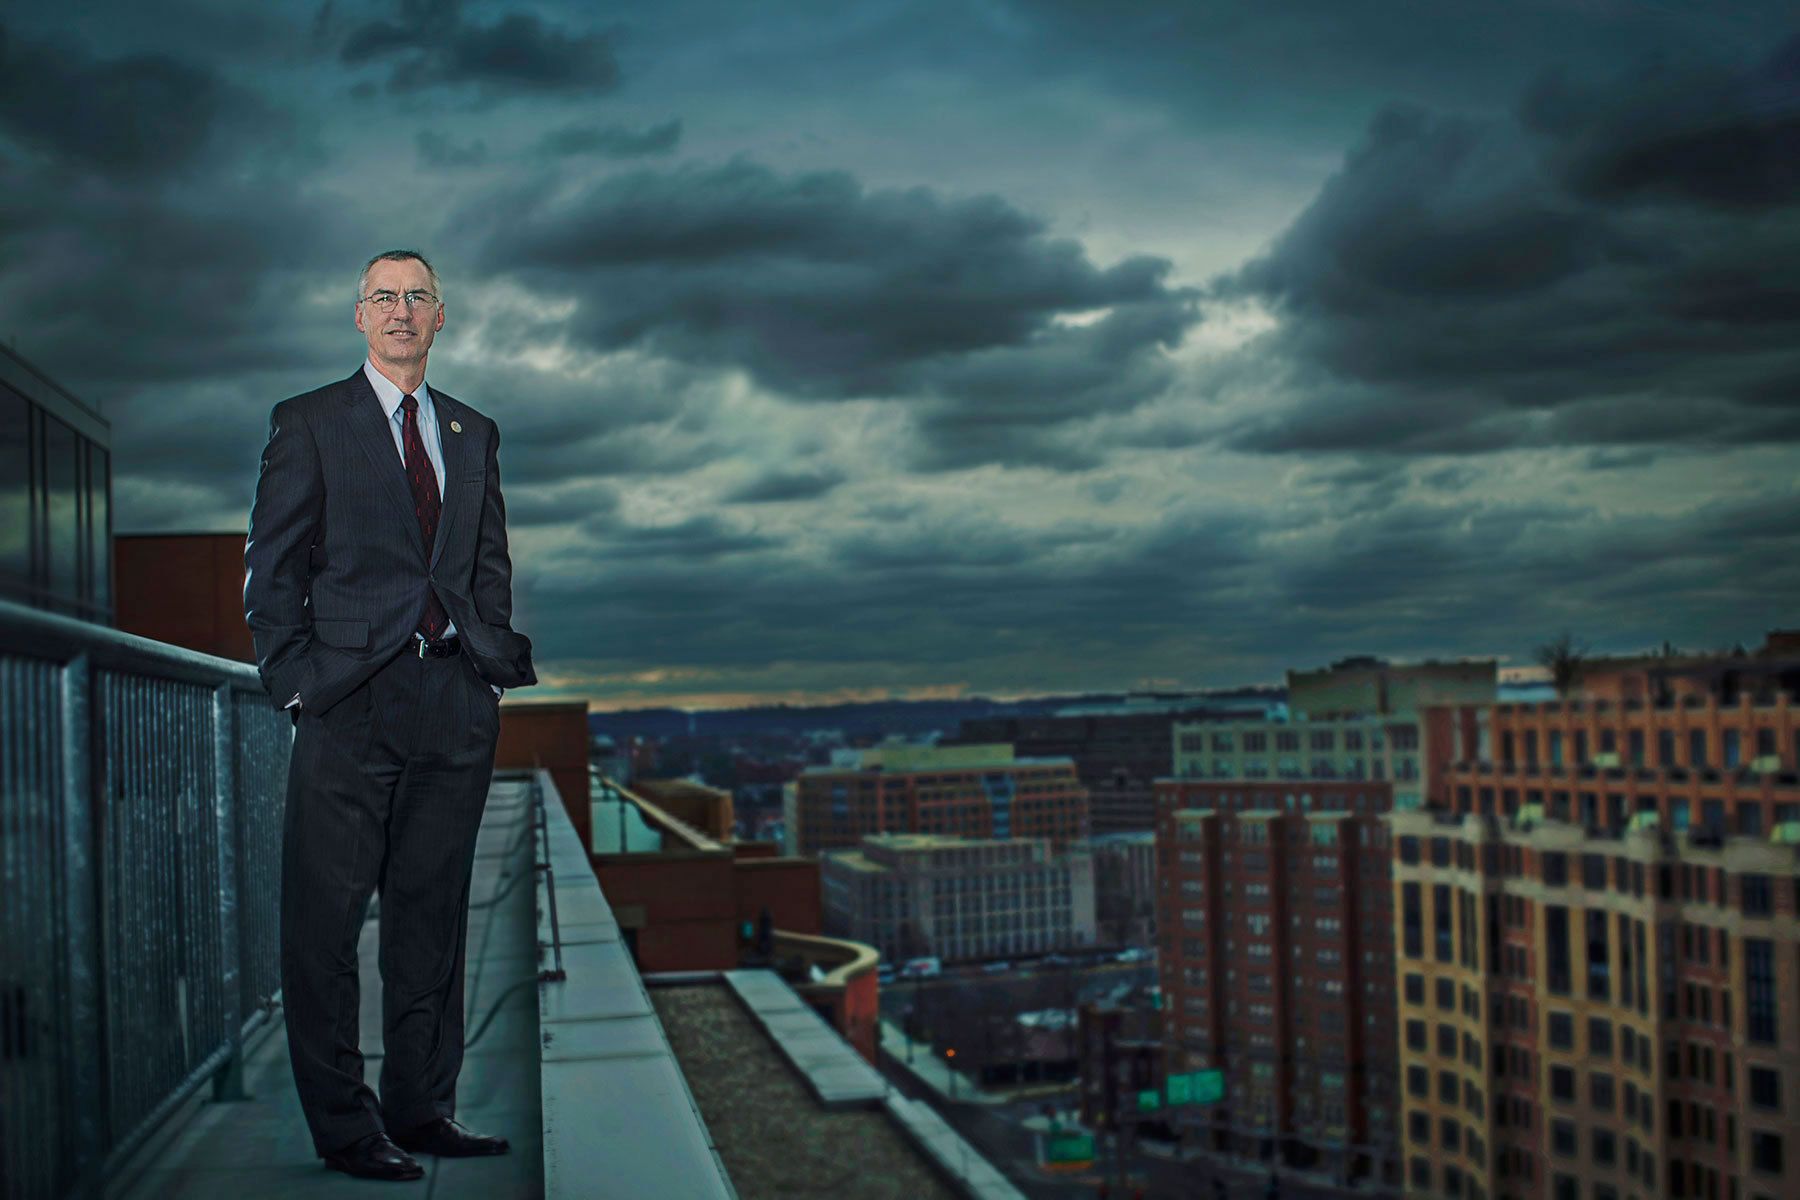 Richard Spires, Chief Information Officer-   US Department of Homeland Security on the rooftop of the Homeland Security offices overlooking Washington, DC